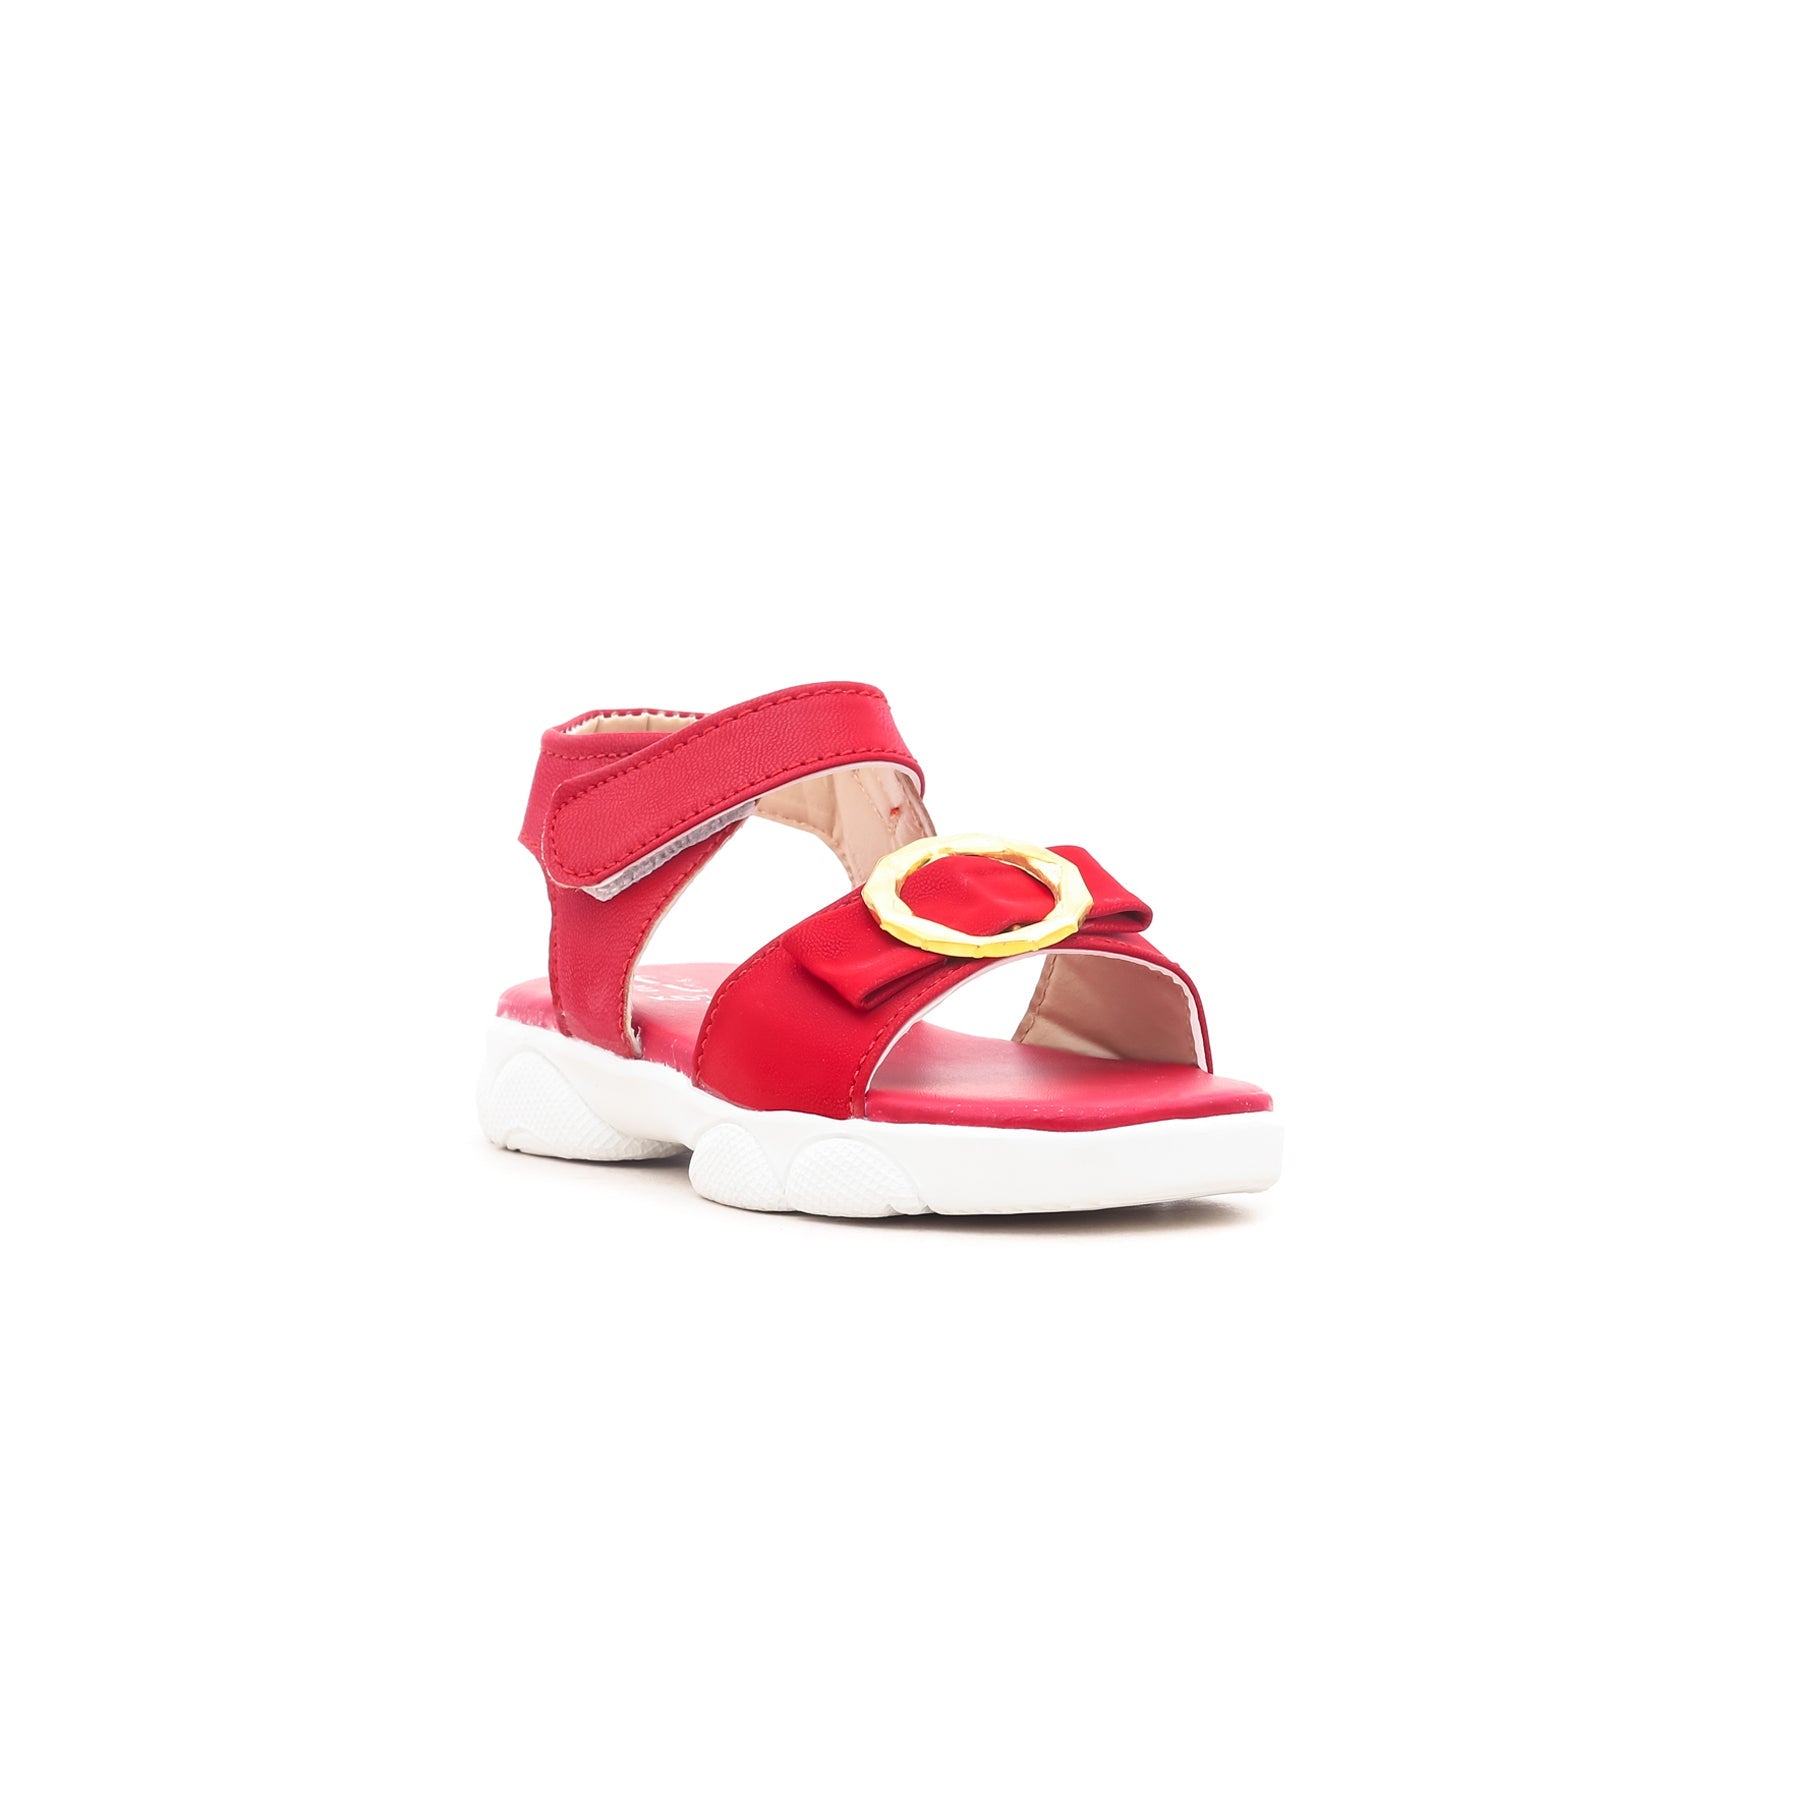 Girls Red Casual Sandal KD7410